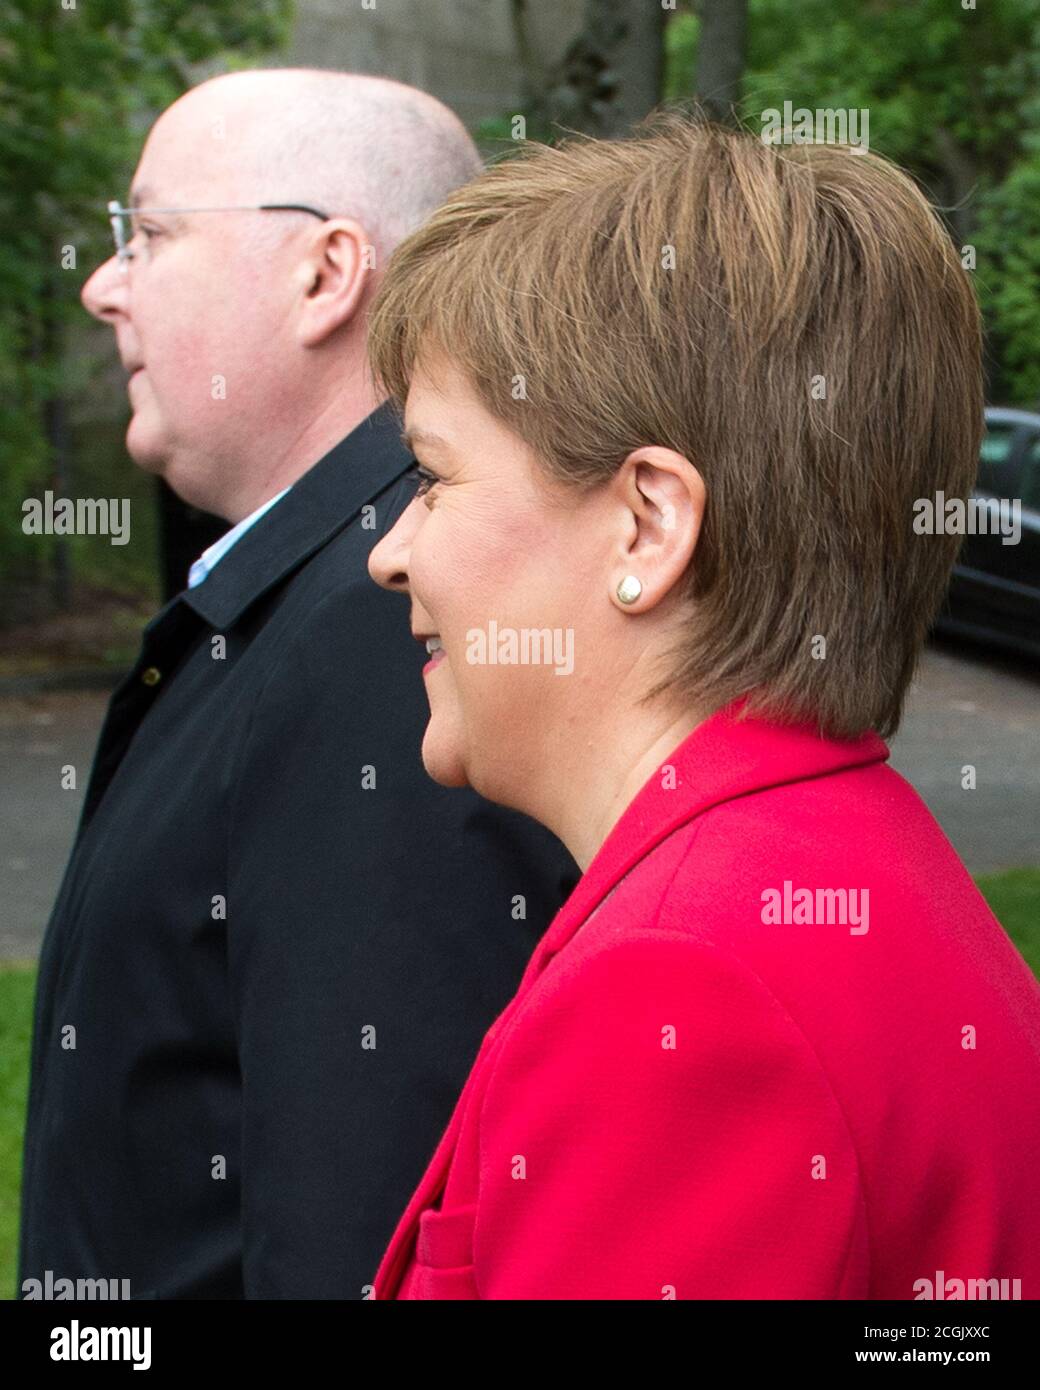 Uddingston, Scotland, UK.  Pictured: (right) Nicola Sturgeon - First Minister of Scotland and Leader of the Scottish National Party (SNP), seen with her husband, (left) Peter Murrell CEO of the Scottish National Party (SNP), visiting her local polling station to cast her vote in the European Elections for the SNP to keep Scotland in Europe. Credit: Colin Fisher/Alamy Live News. Stock Photo